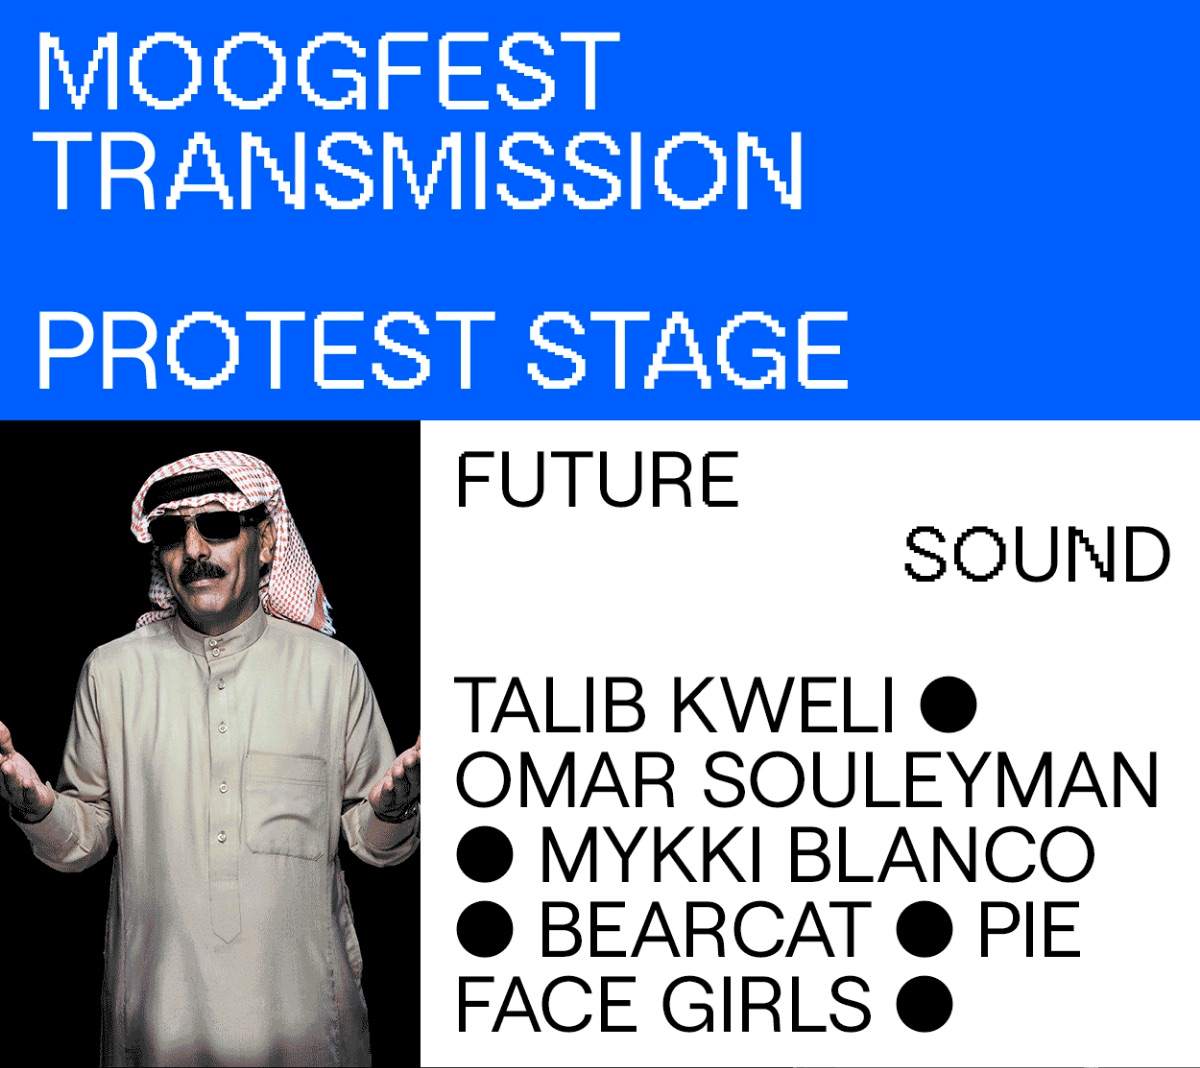 Omar Souleyman, Mykki Blanco to play Moogfest 2017 Protest Stage image